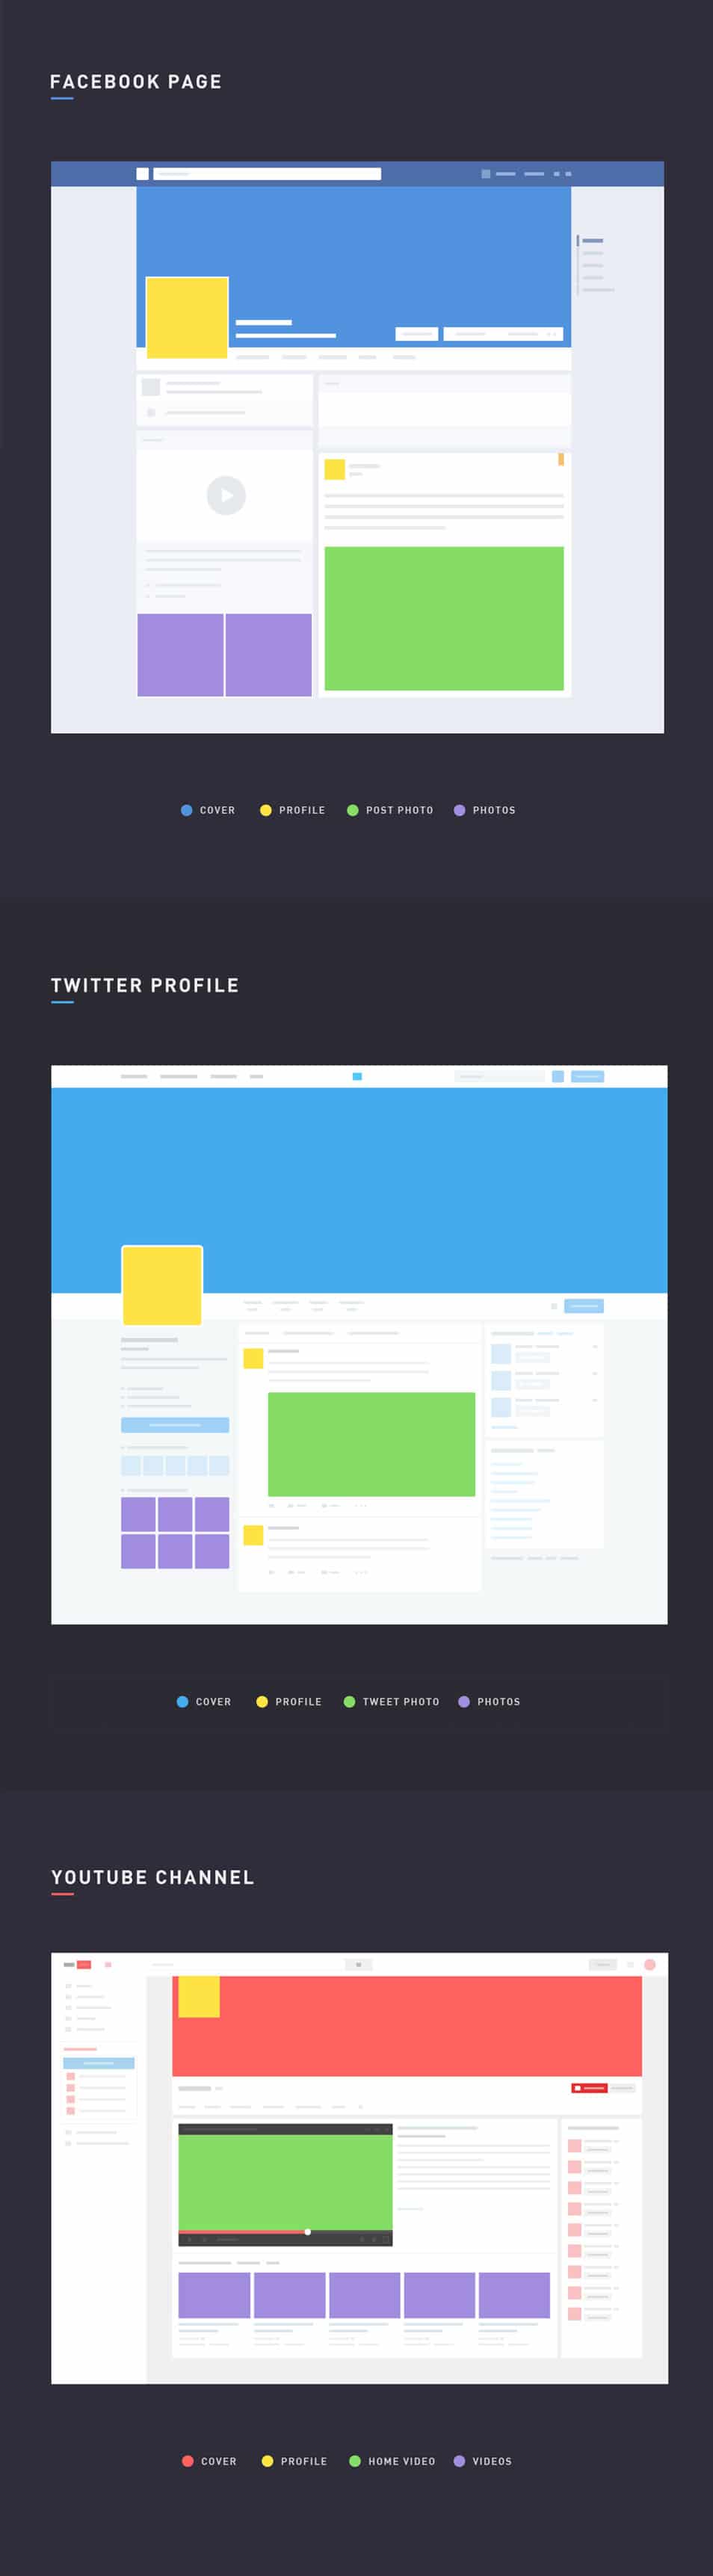 Download Free Facebook-Twitter And Youtube Social Media Mockups ...